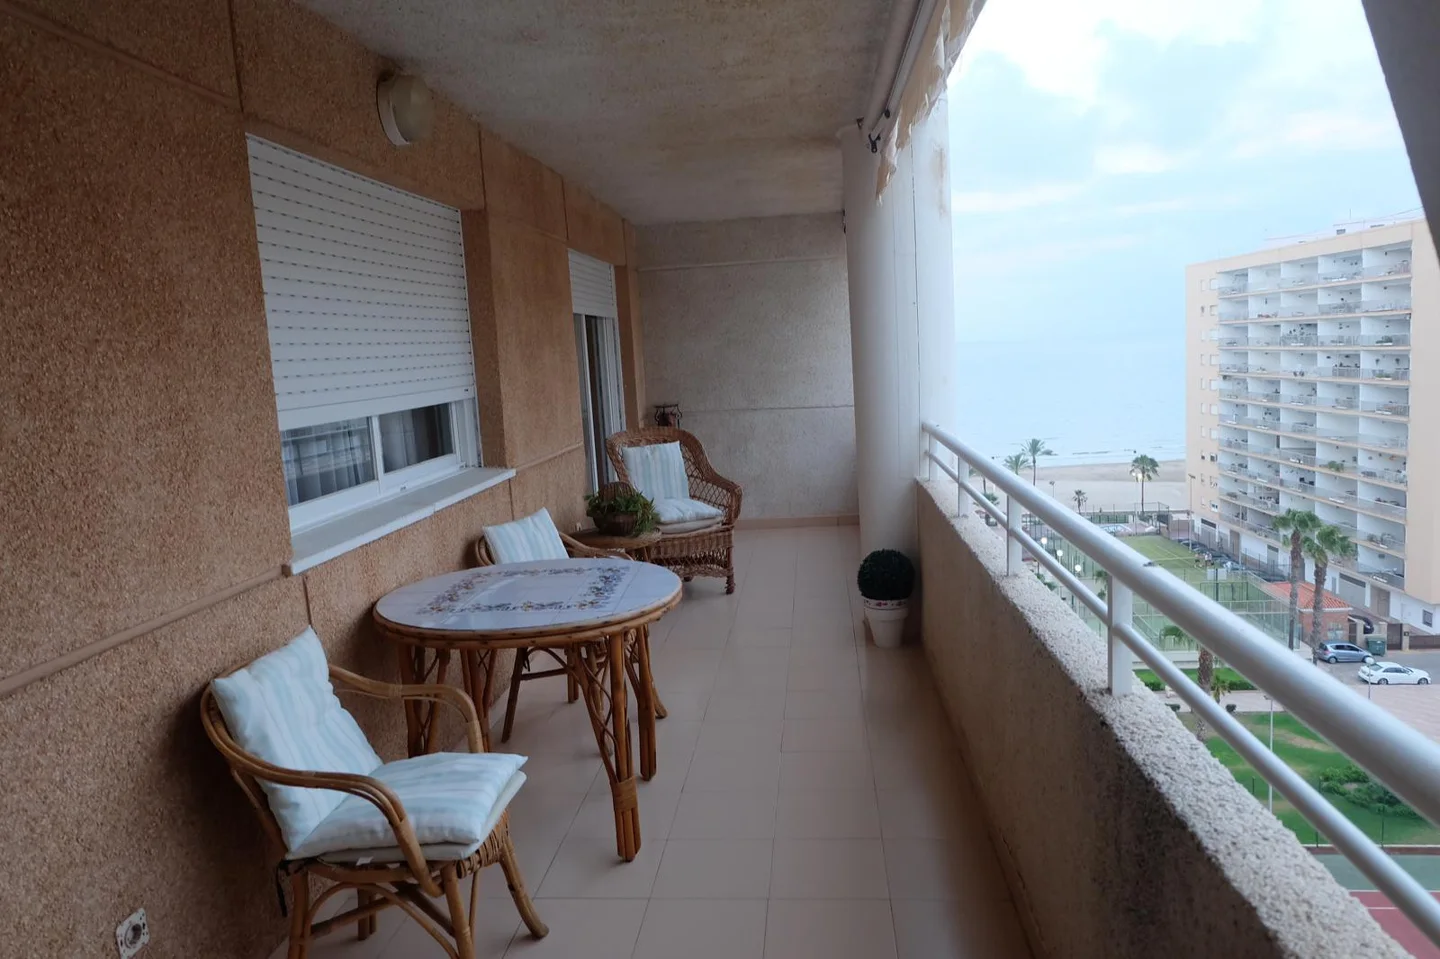 Flat in "Cullera" with incredible views